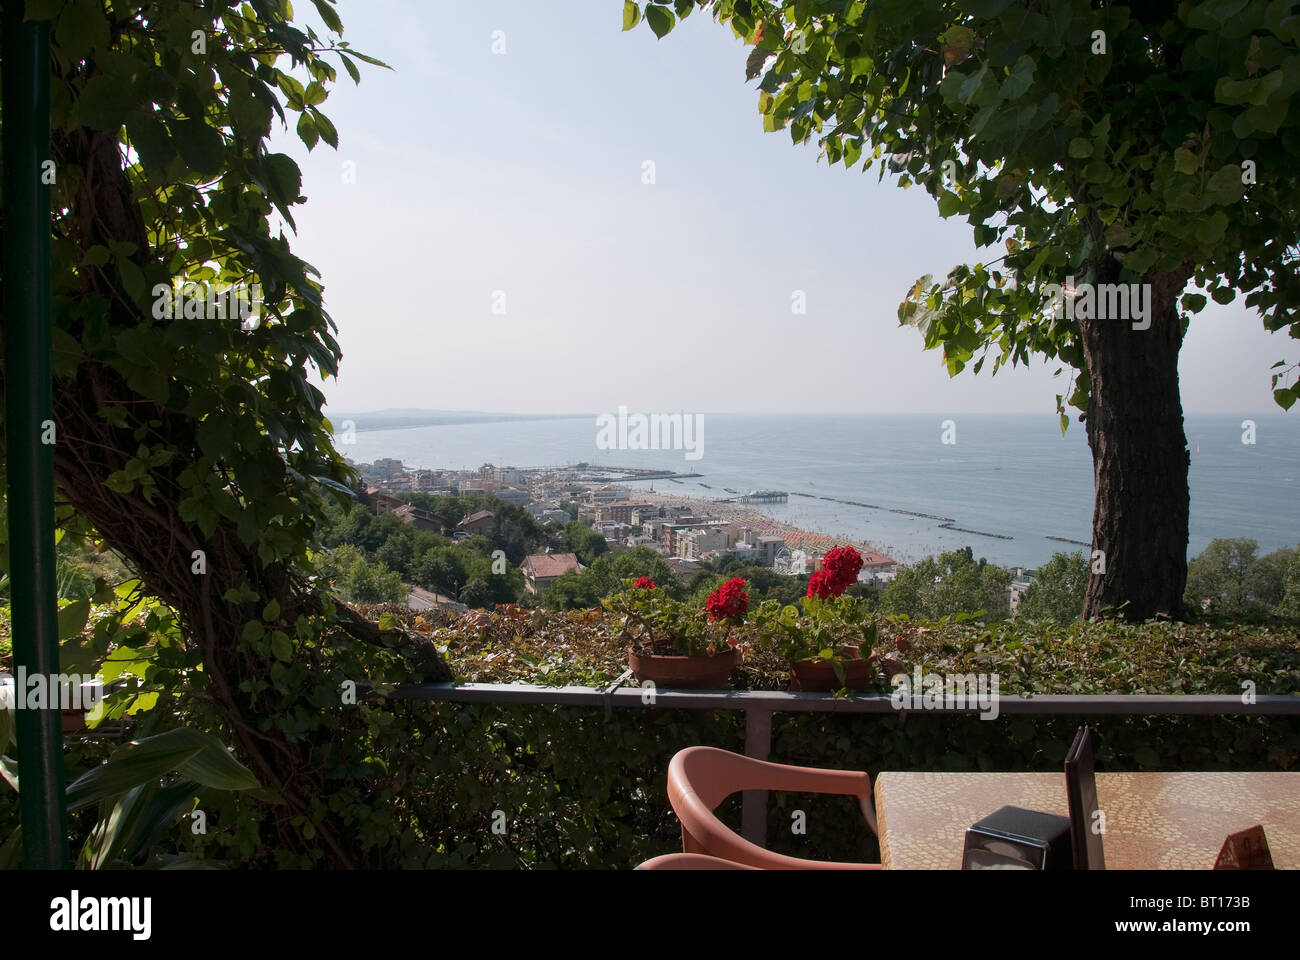 View of Gabicce Mare, Italy from a terrace on Gabicce Monte Stock Photo